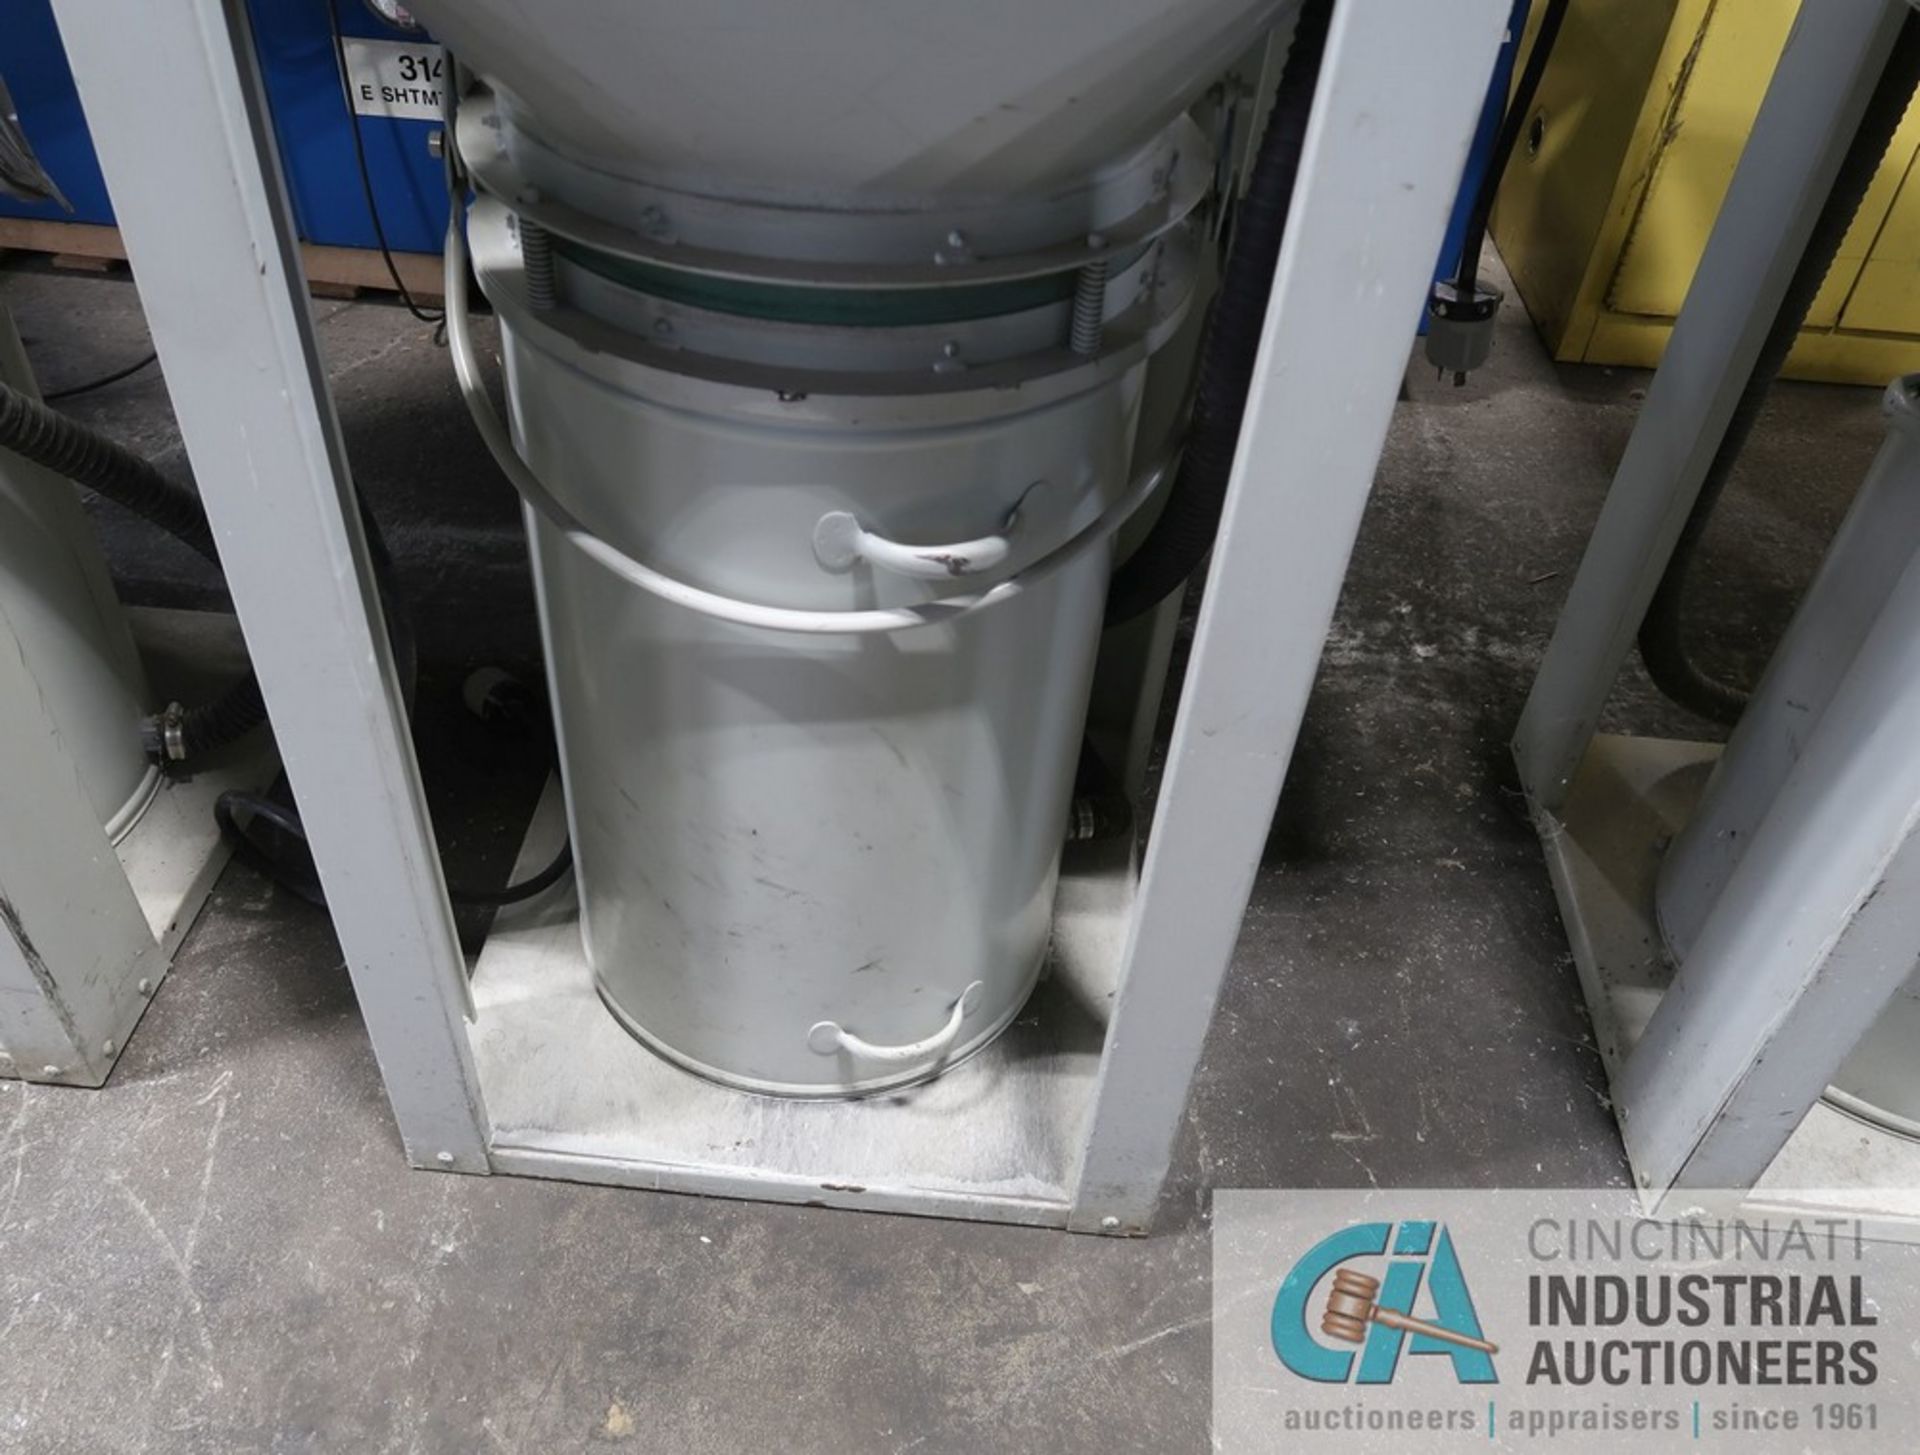 1 HP DCE UNIMASTER MODEL UMA73G1AD DUST COLLECTOR; S/N 98-1520/09 - From eyeglass lense - Image 2 of 4